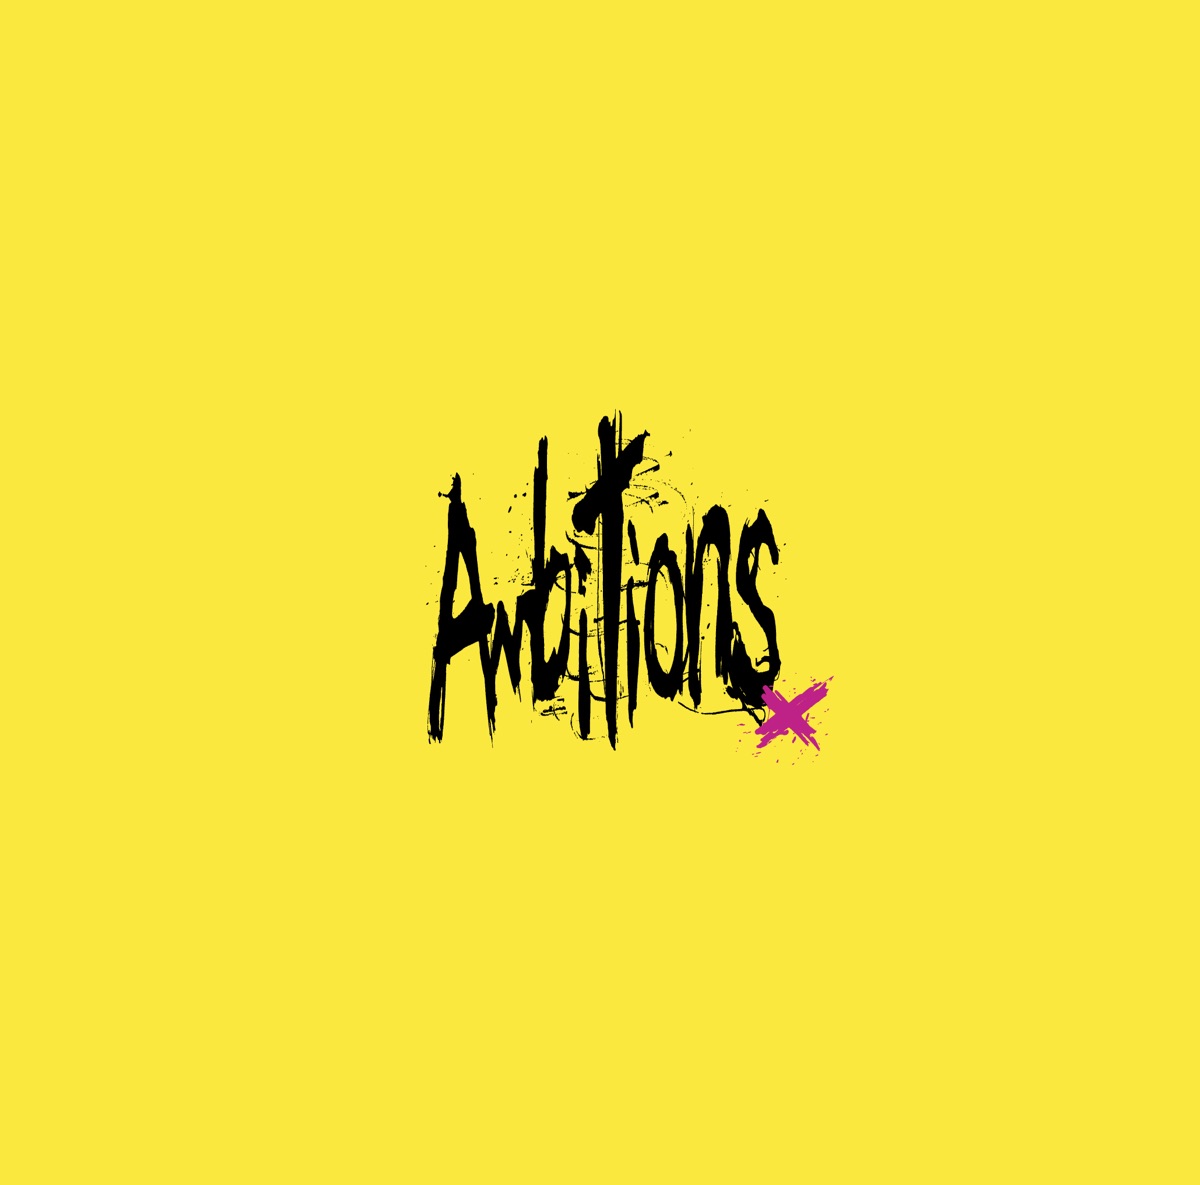 Cover for『ONE OK ROCK - Taking Off』from the release『Ambitions』